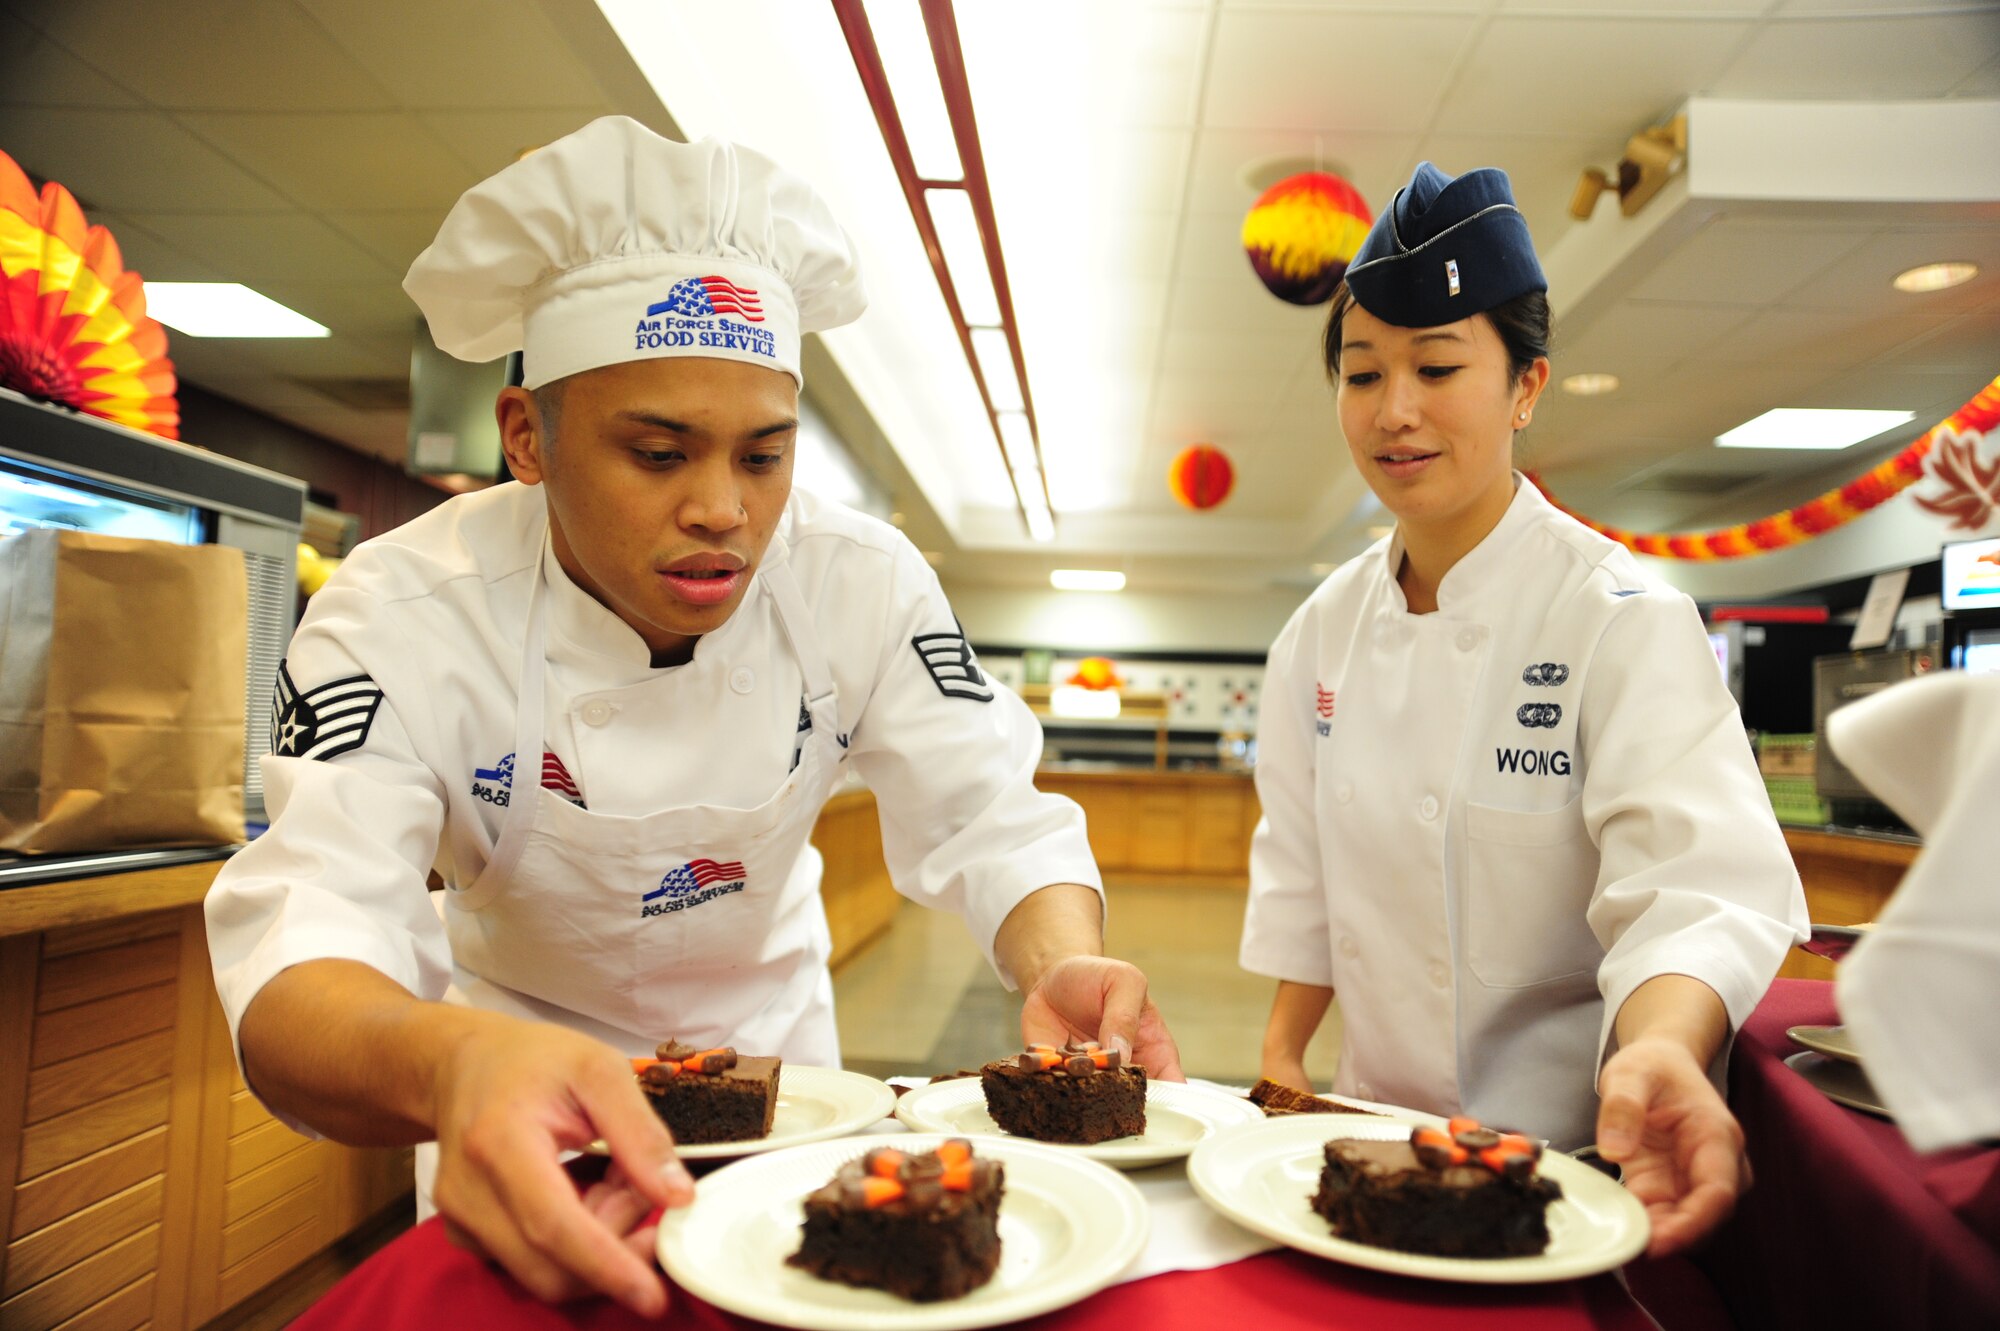 Staff Sgt. Jerry Calalang, and 1st Lt. Diana Wong, 509th Force Support Squadron, position desserts for the Thanksgiving Day Meal at the Ozark Inn Dining Facility, Whiteman Air Force Base, Mo., Nov. 22. Each year the dining facility hosts a Thanksgiving Day meal for Airmen and their families. This event boosts morale for Airmen that are working through the holidays and can’t make it home to their families. (U.S. Air Force photo/Senior Airman Nick Wilson) (Released)